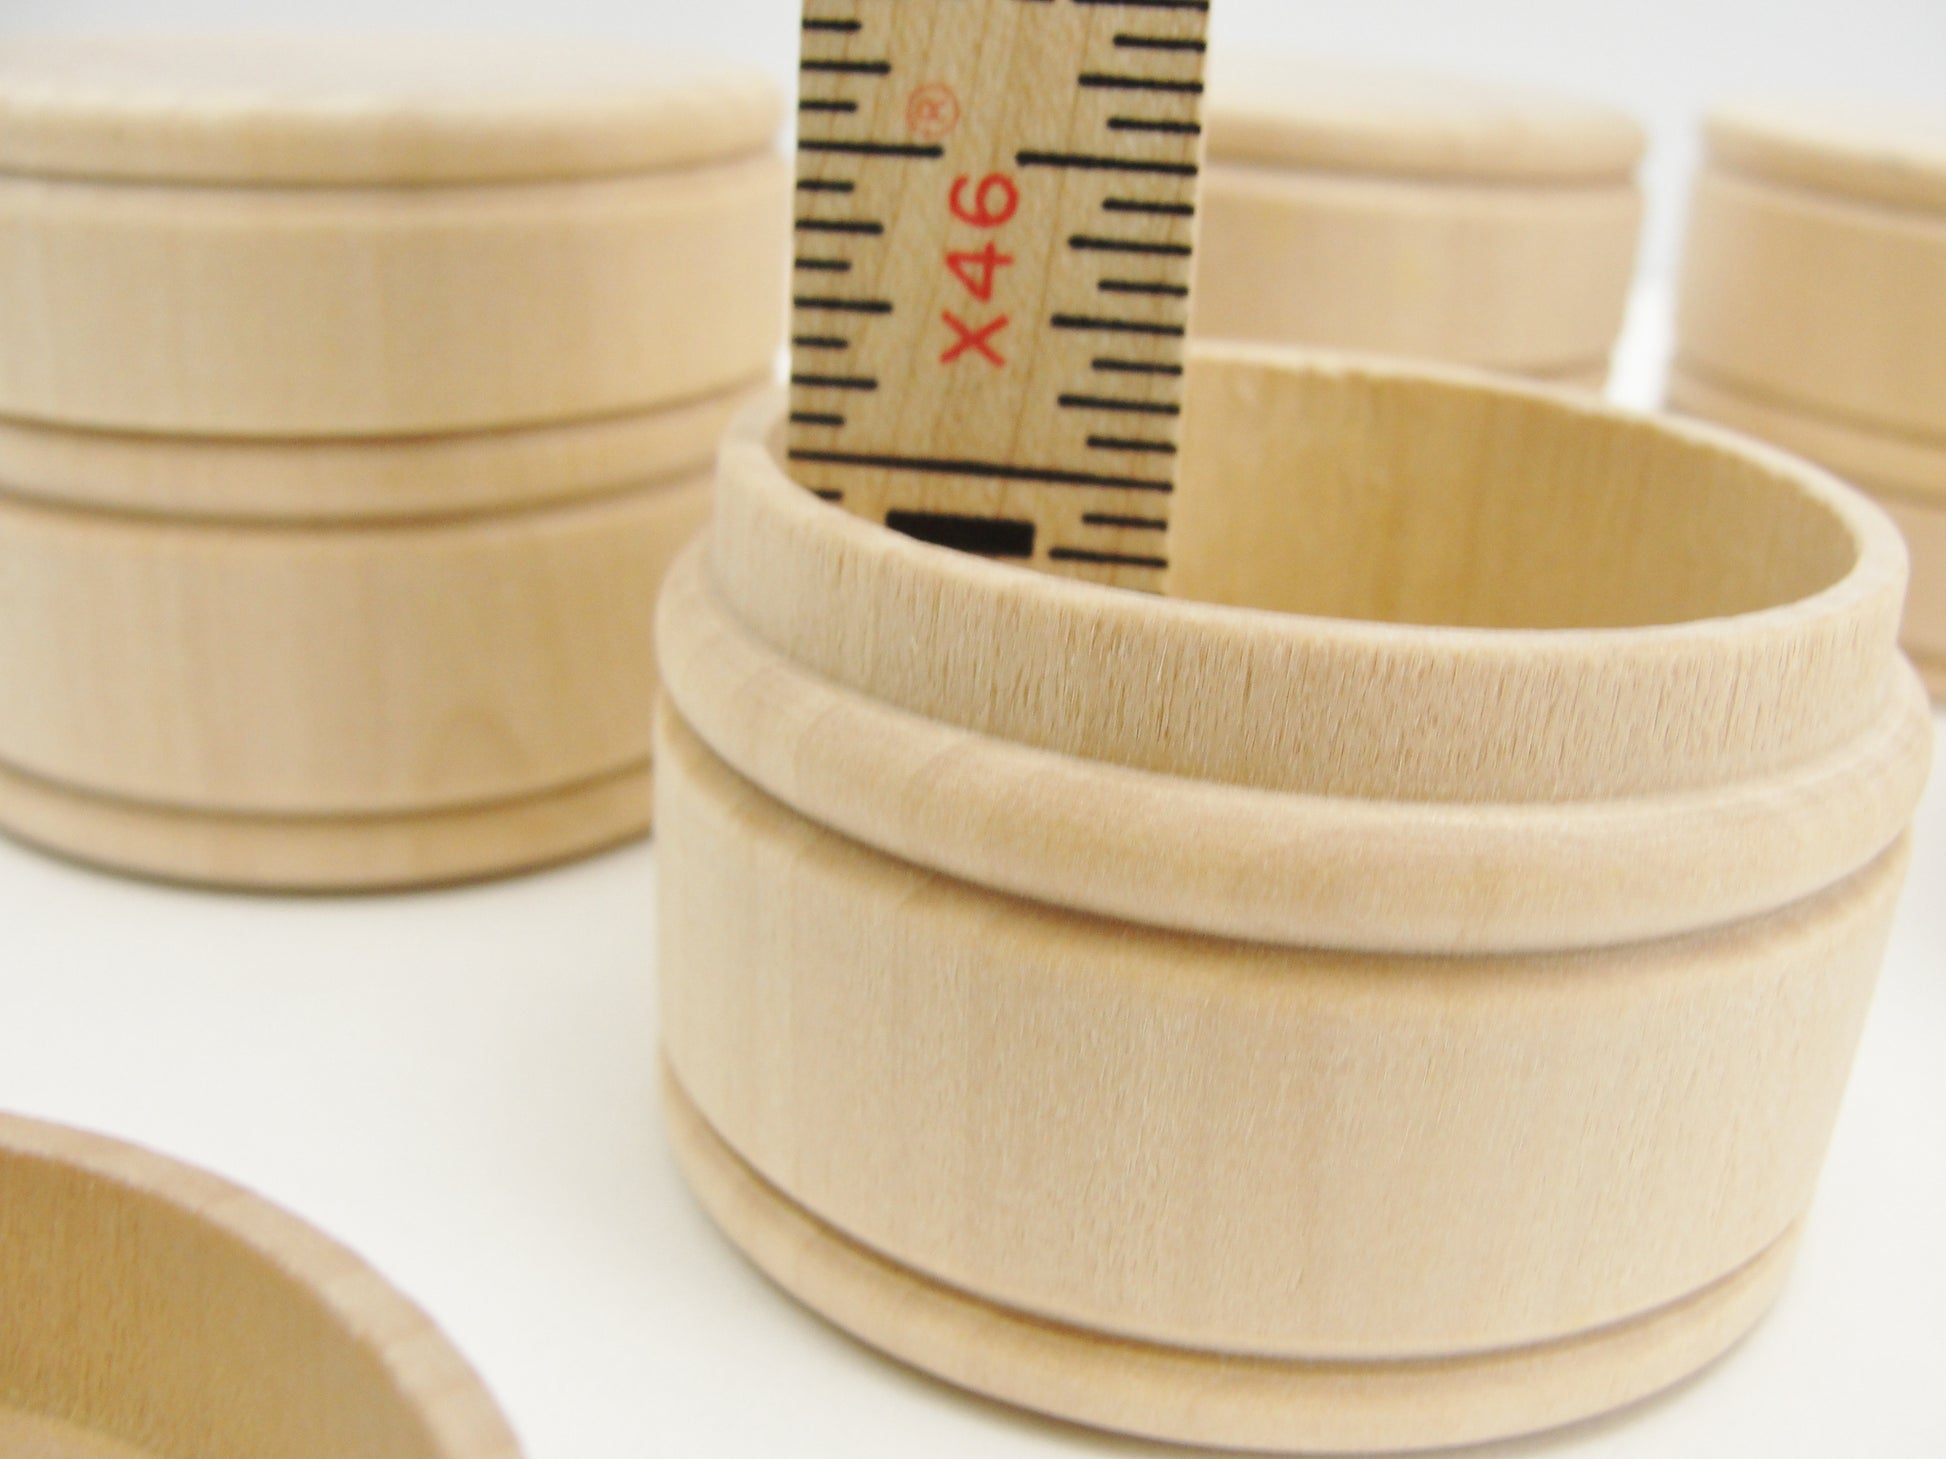 Wooden ring box or keepsake box, middle size of 3, set of 5 - Wood parts - Craft Supply House